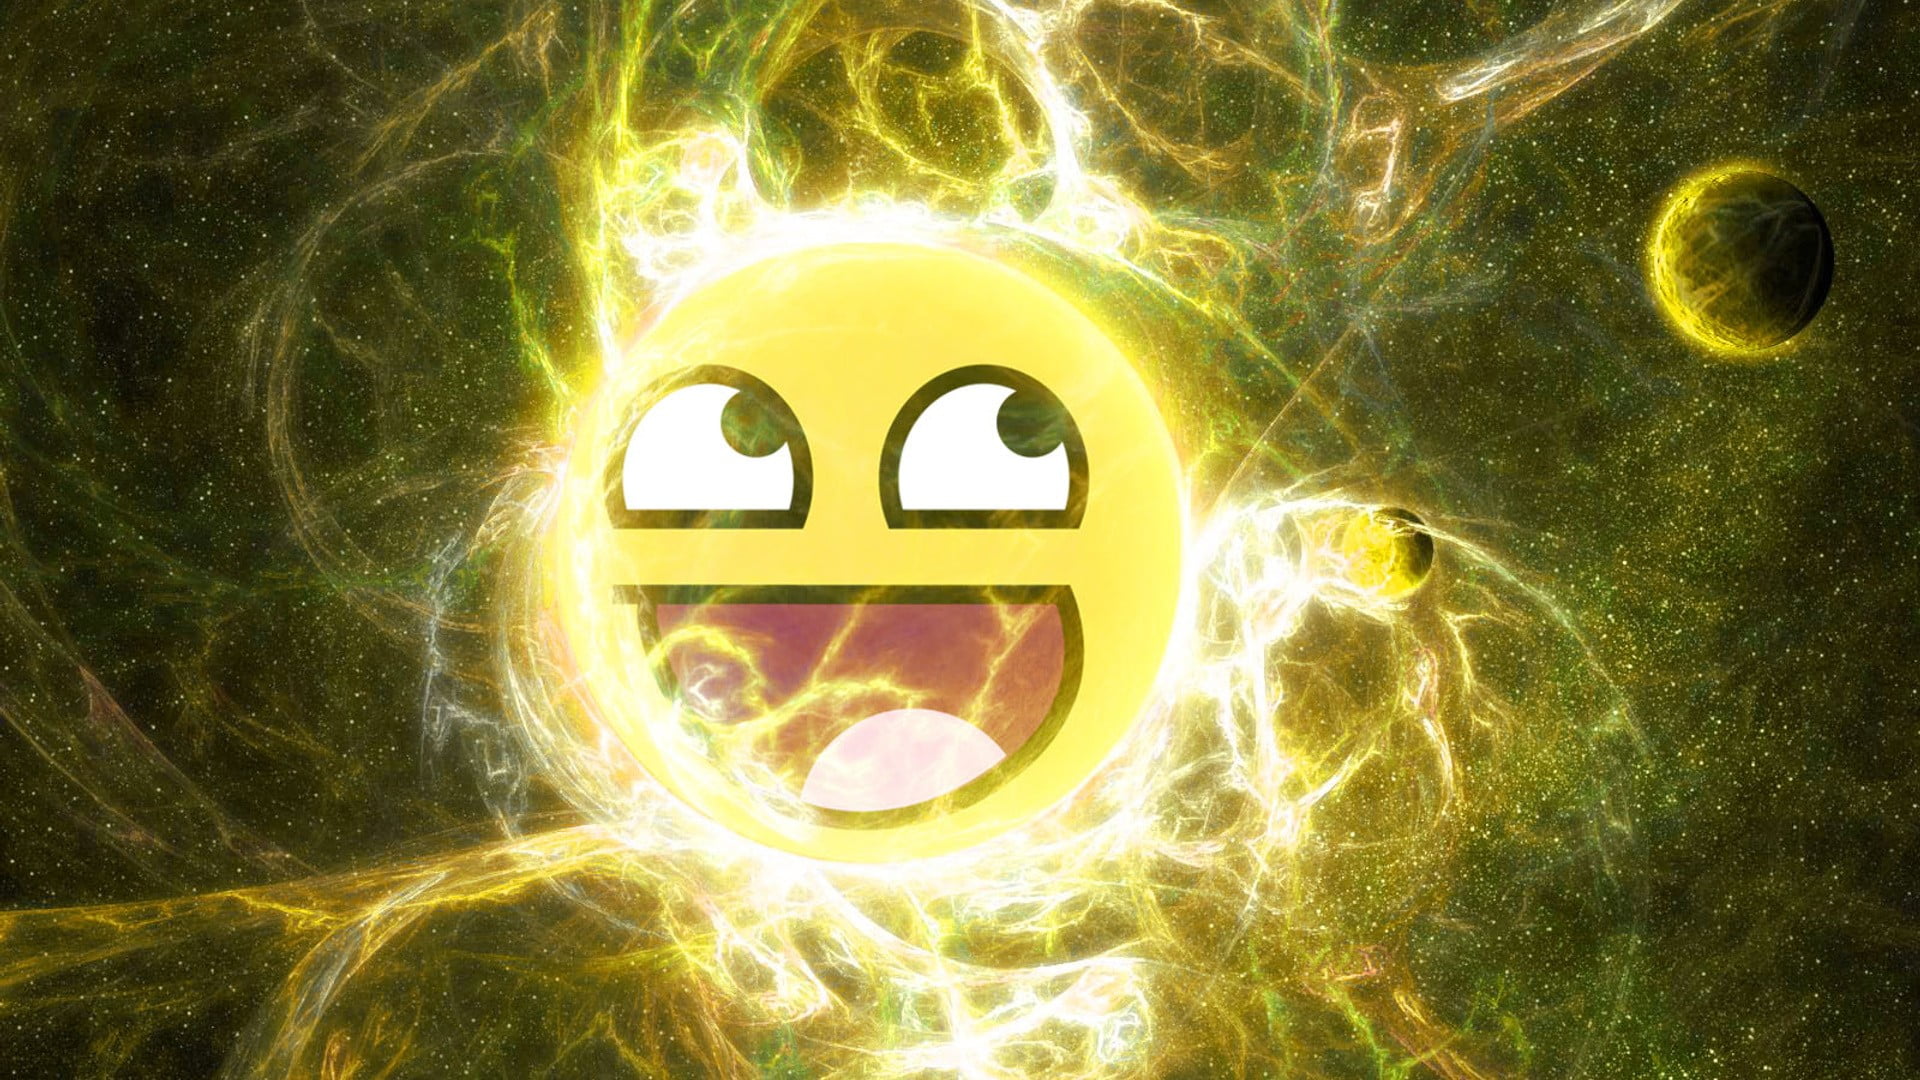 smiley emoji, awesome face, space, planet, streaks, no people